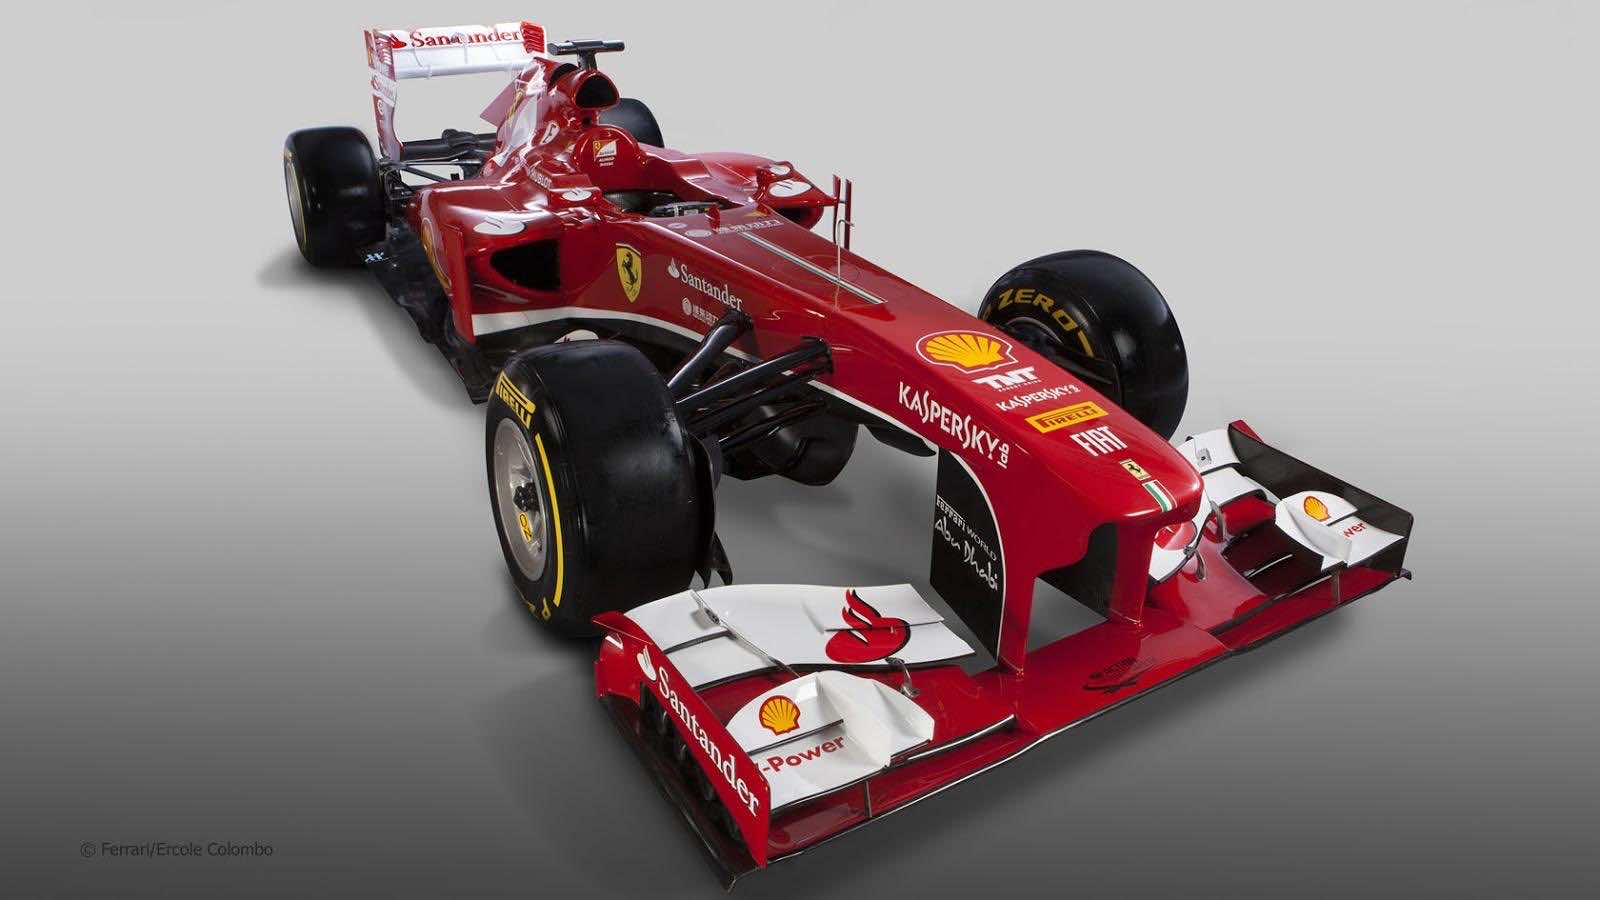 Download Over 50 Formula One Cars F1 Wallpapers in HD For Free Download